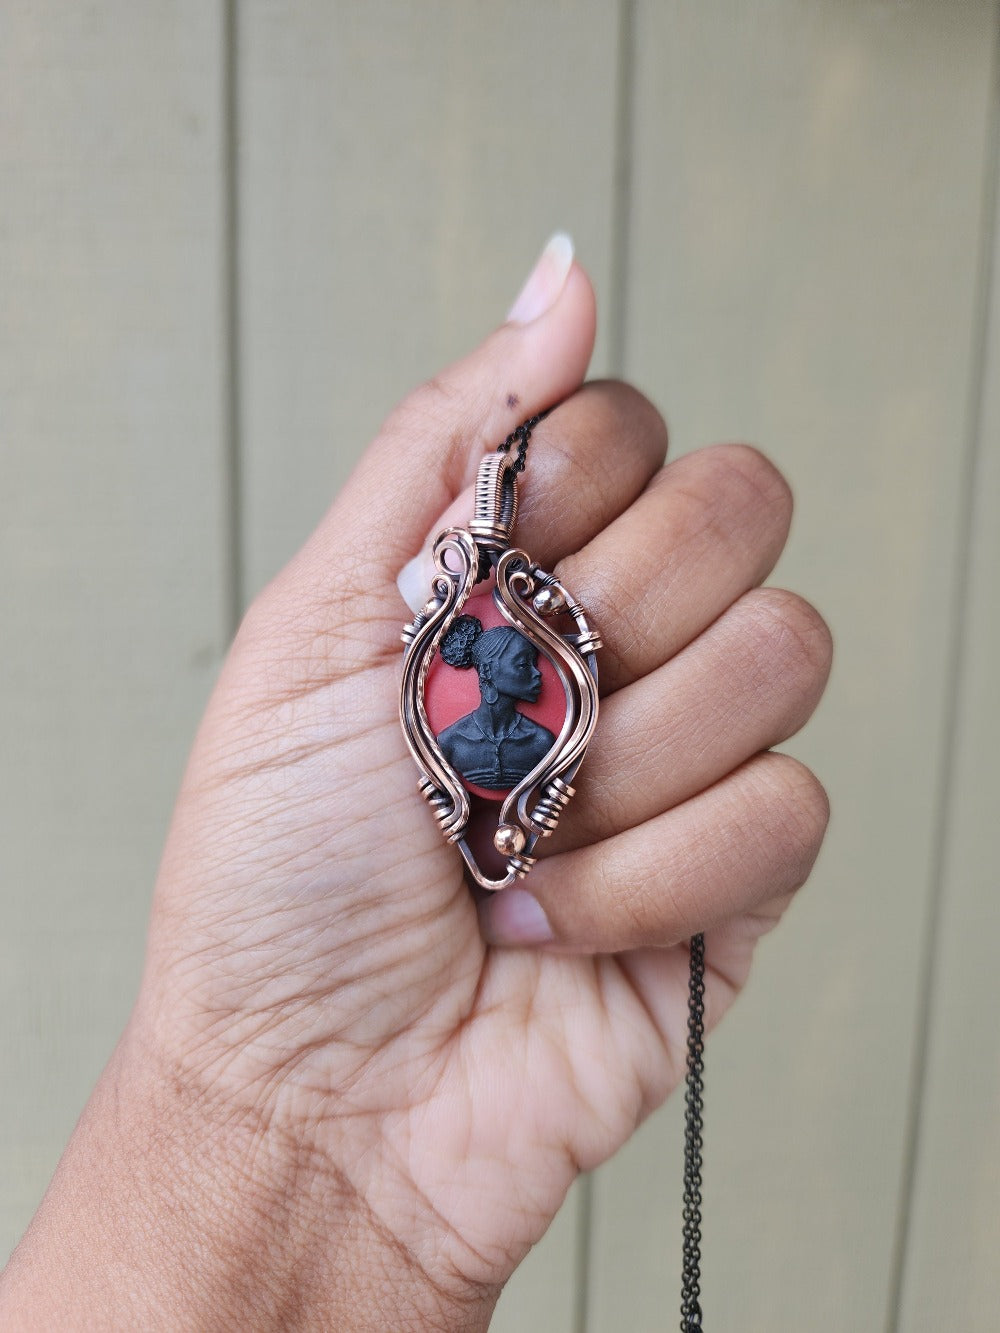 Black Beauty Red Cameo Necklace